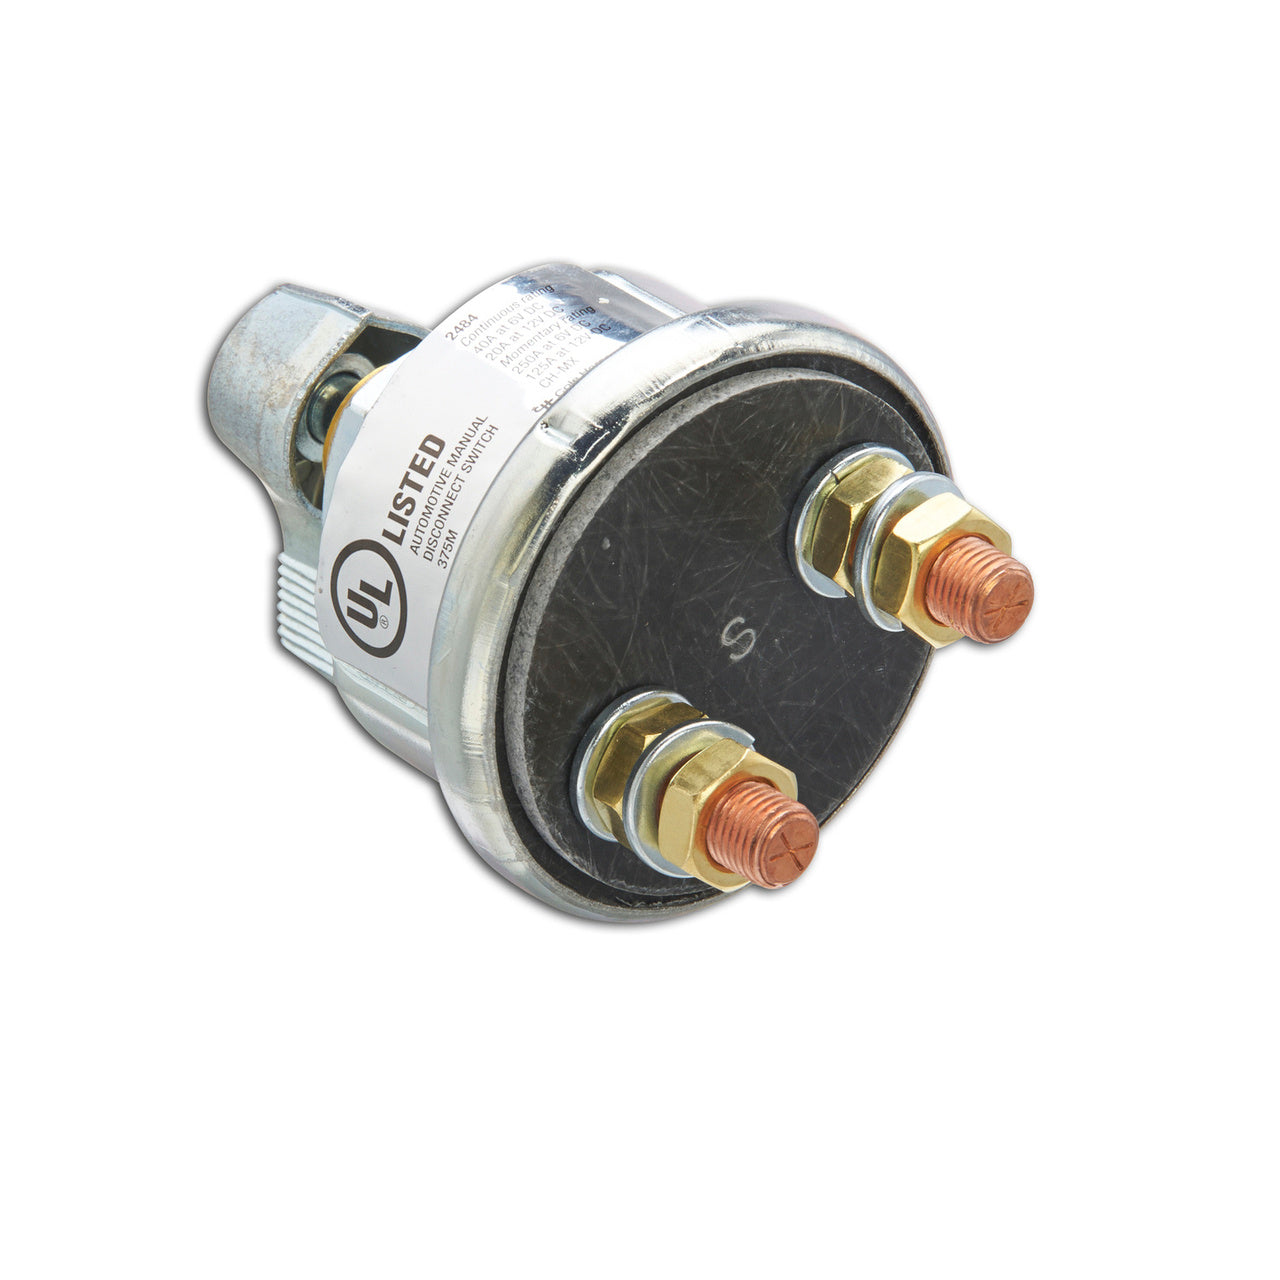 CH 2484-BX Metal Body Manual Battery Disconnect Switch (6V, 40A, SPST)